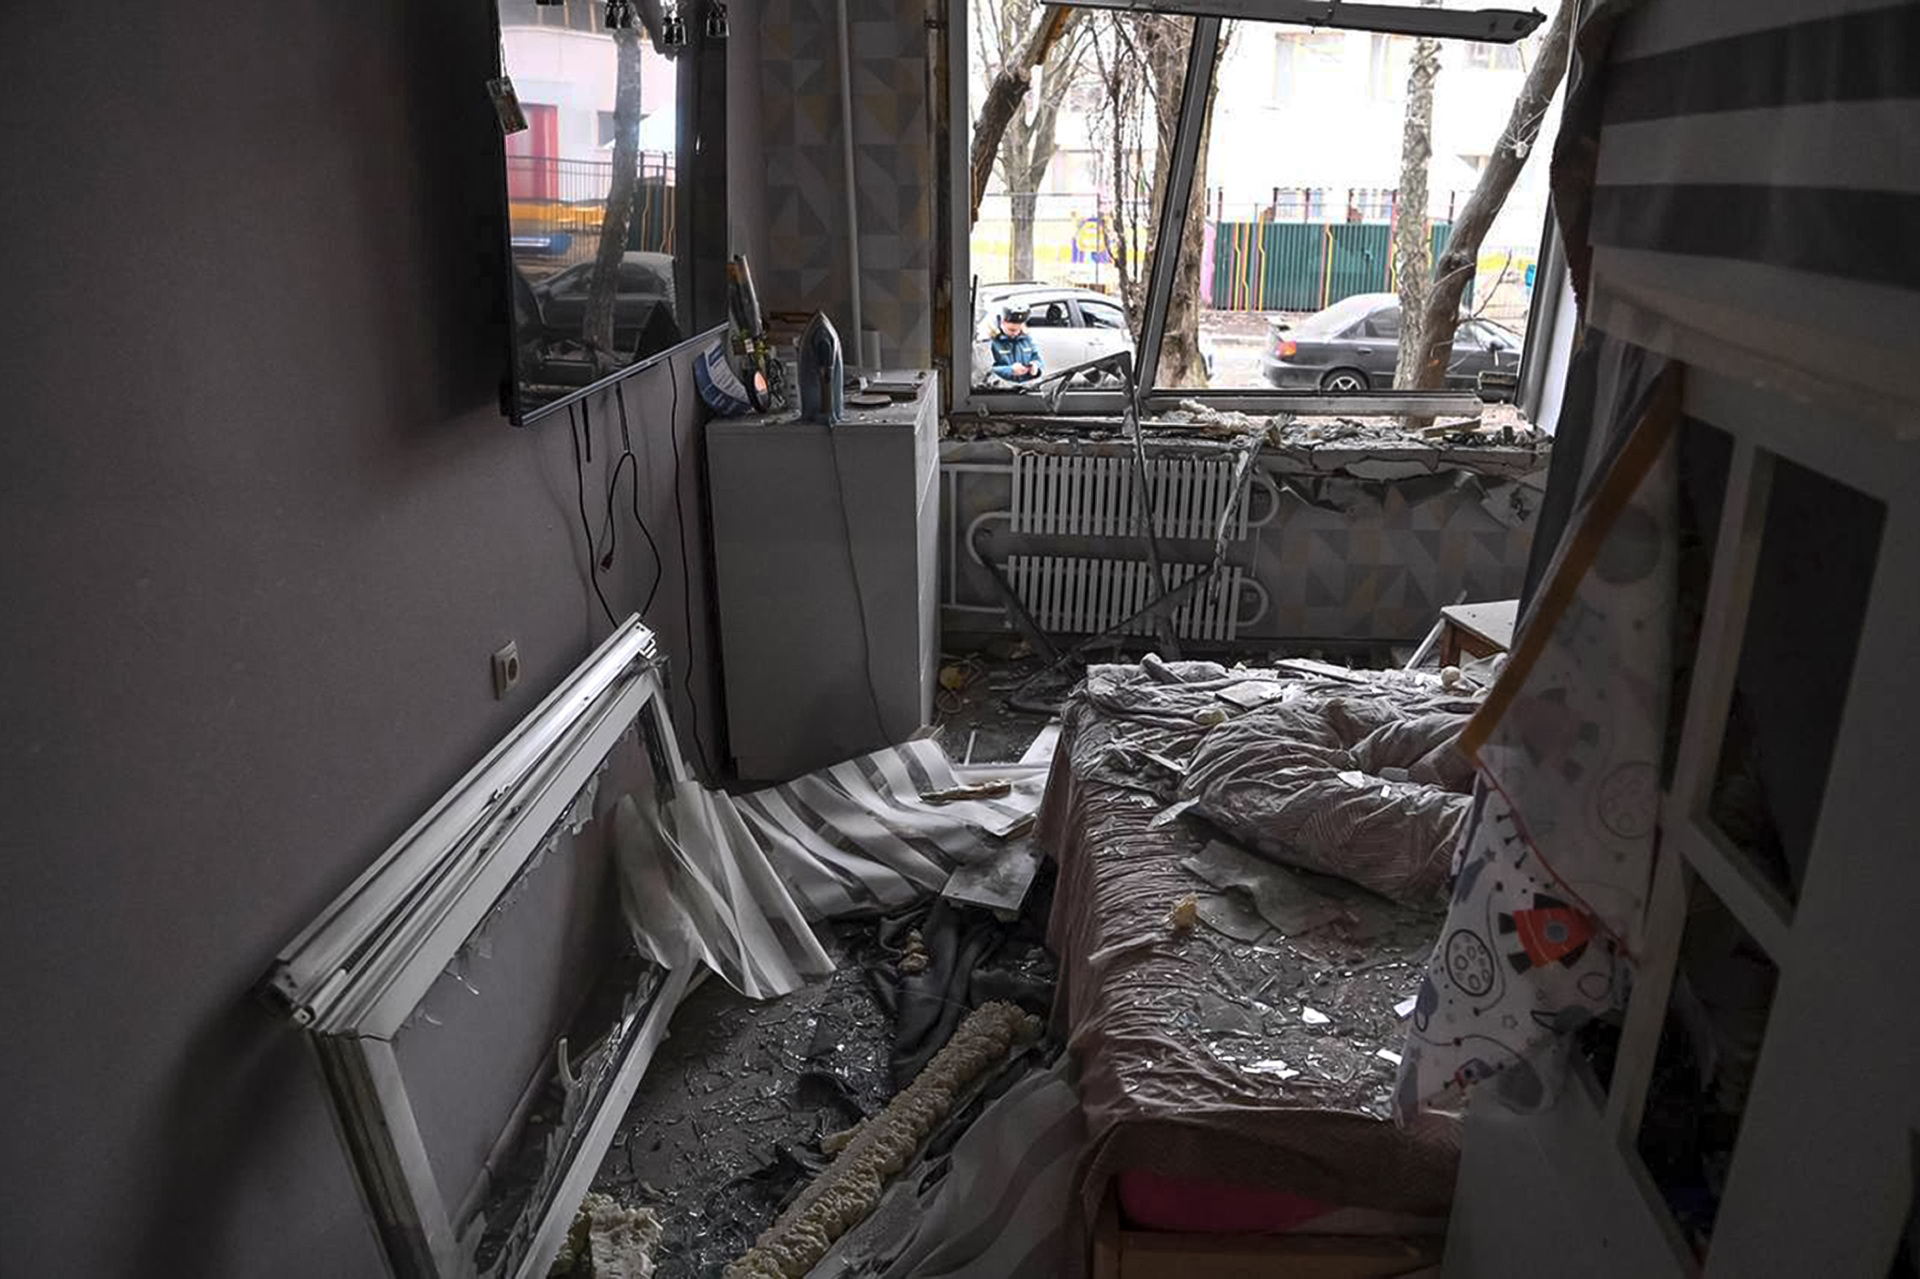 This photo released by Belgorod region governor Vyacheslav Gladkov's telegram channel on Saturday, March 16, 2024, shows damage to a flat in an apartment building after shelling from the Ukrainian side, in Belgorod, Russia. A Russian regional governor says two people have been killed in Ukrainian shelling of the city of Belgorod, close to the border with Ukraine. Three others were wounded. (Belgorod region governor Vyacheslav Gladkov telegram channel via AP)